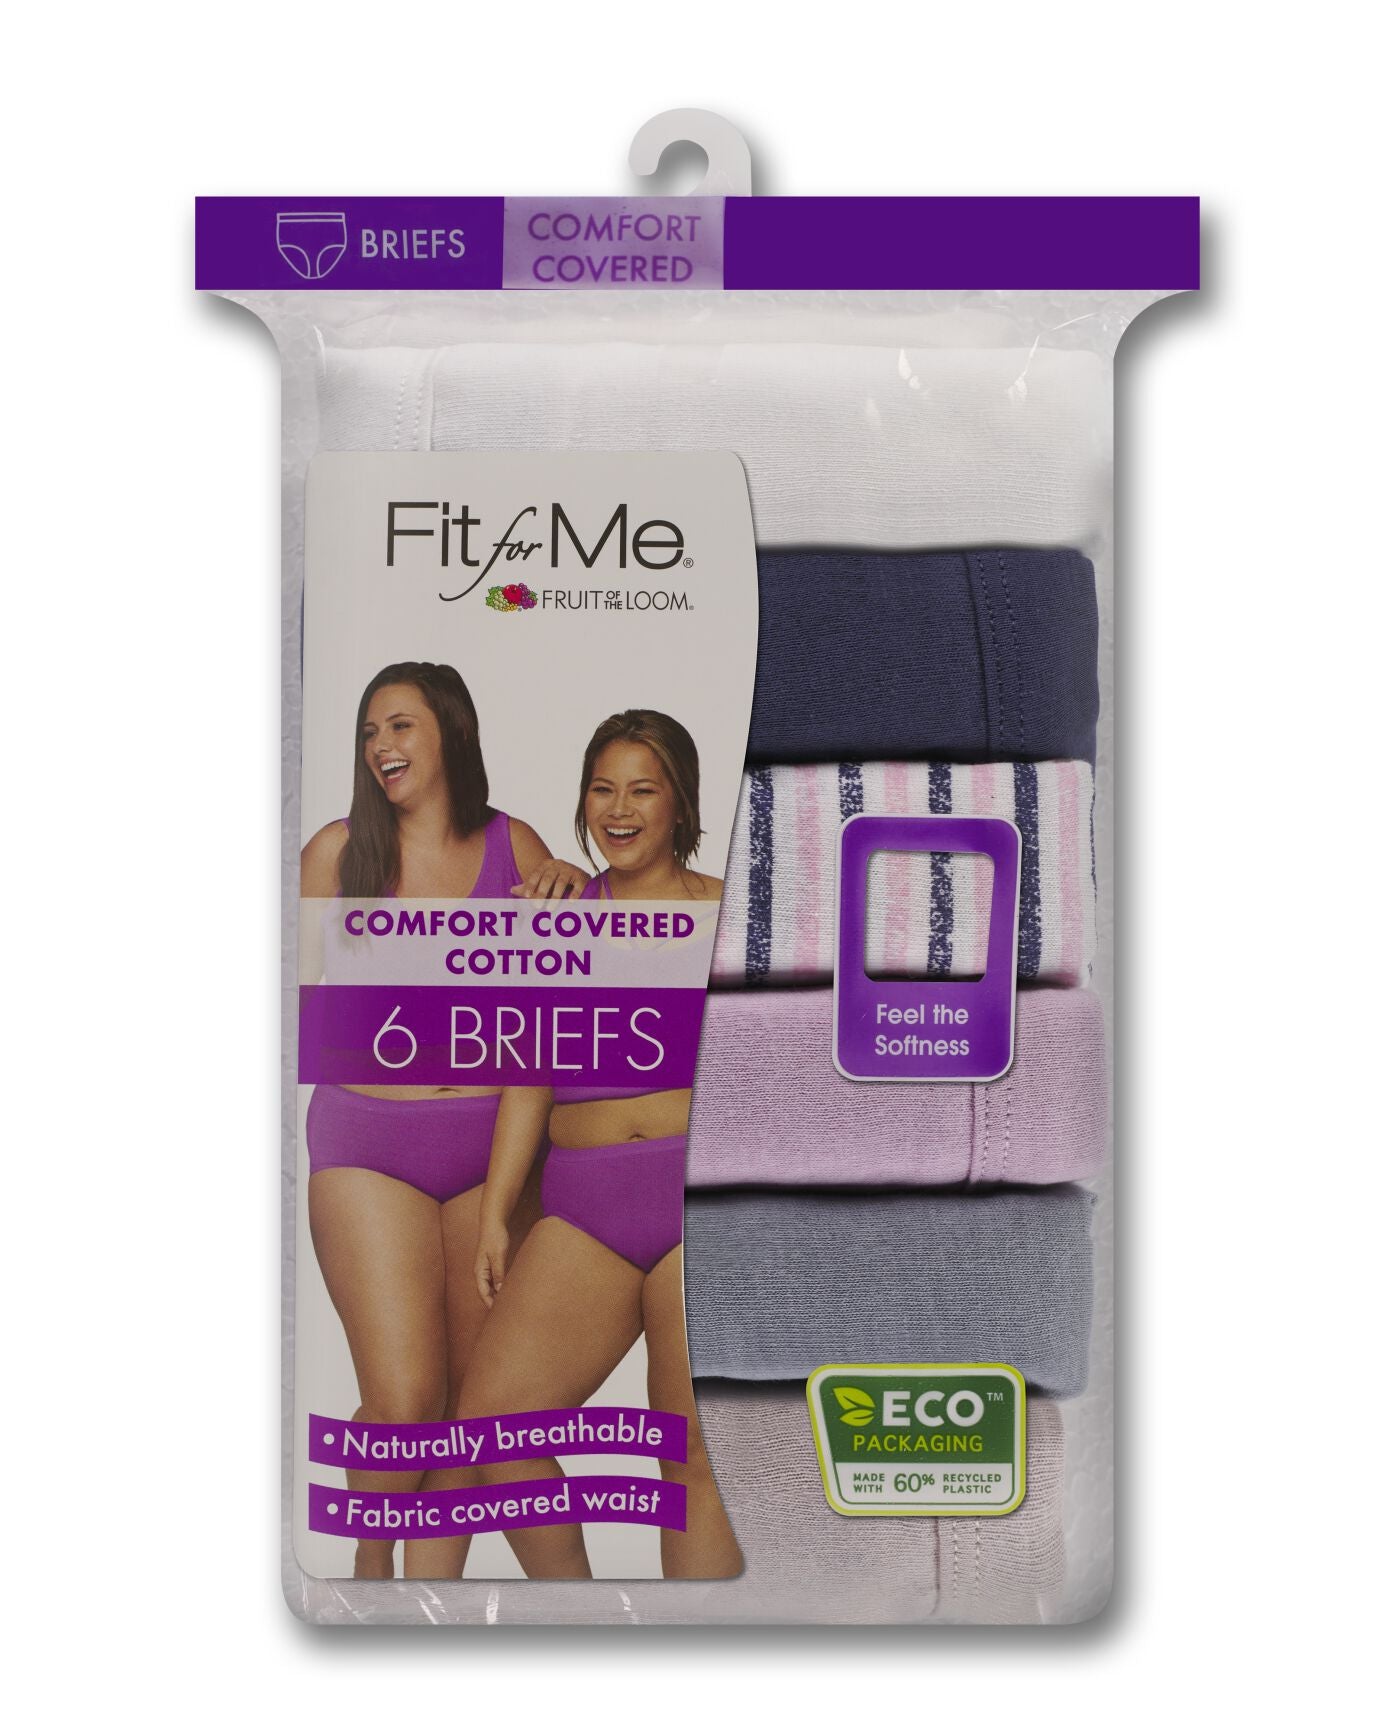 Fruit of the Loom Women's Fit for Me Cotton Brief, 5-Pack, Sizes